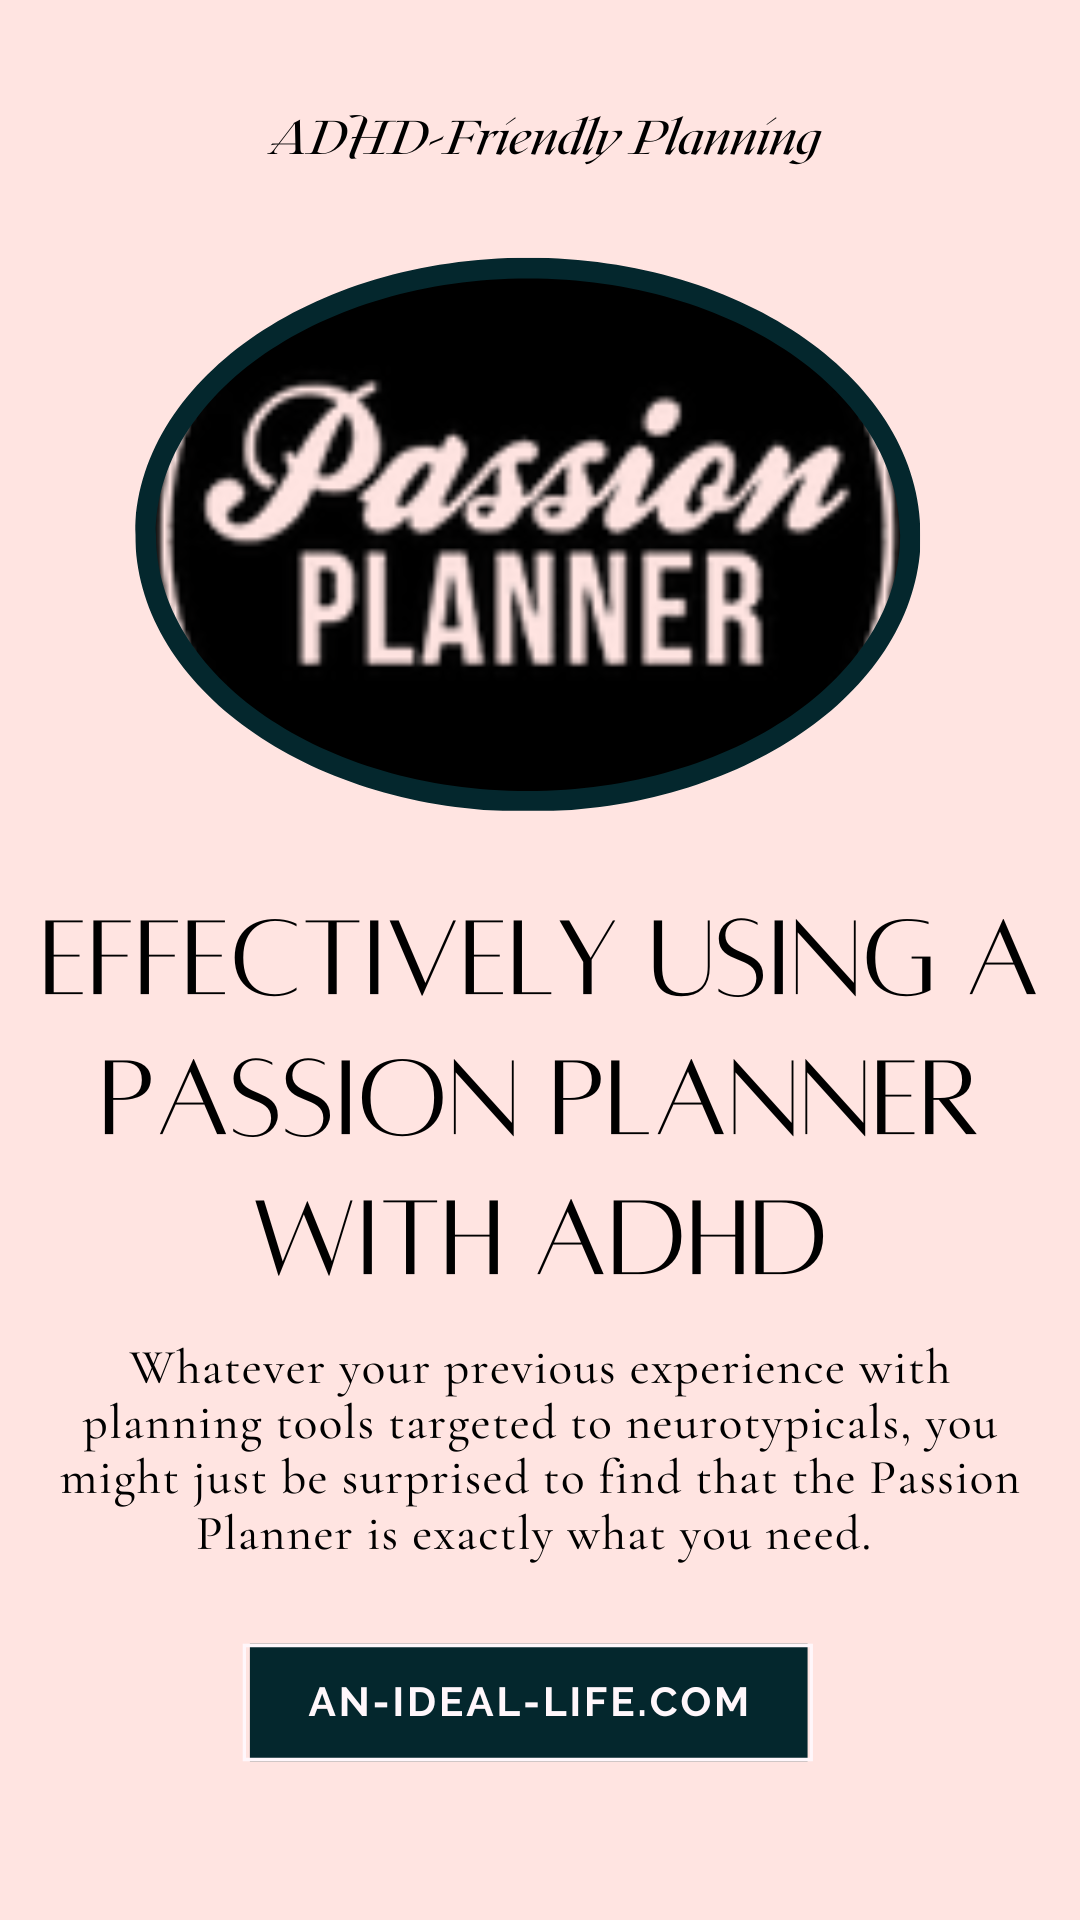 Effectively Using a Passion Planner with ADHD